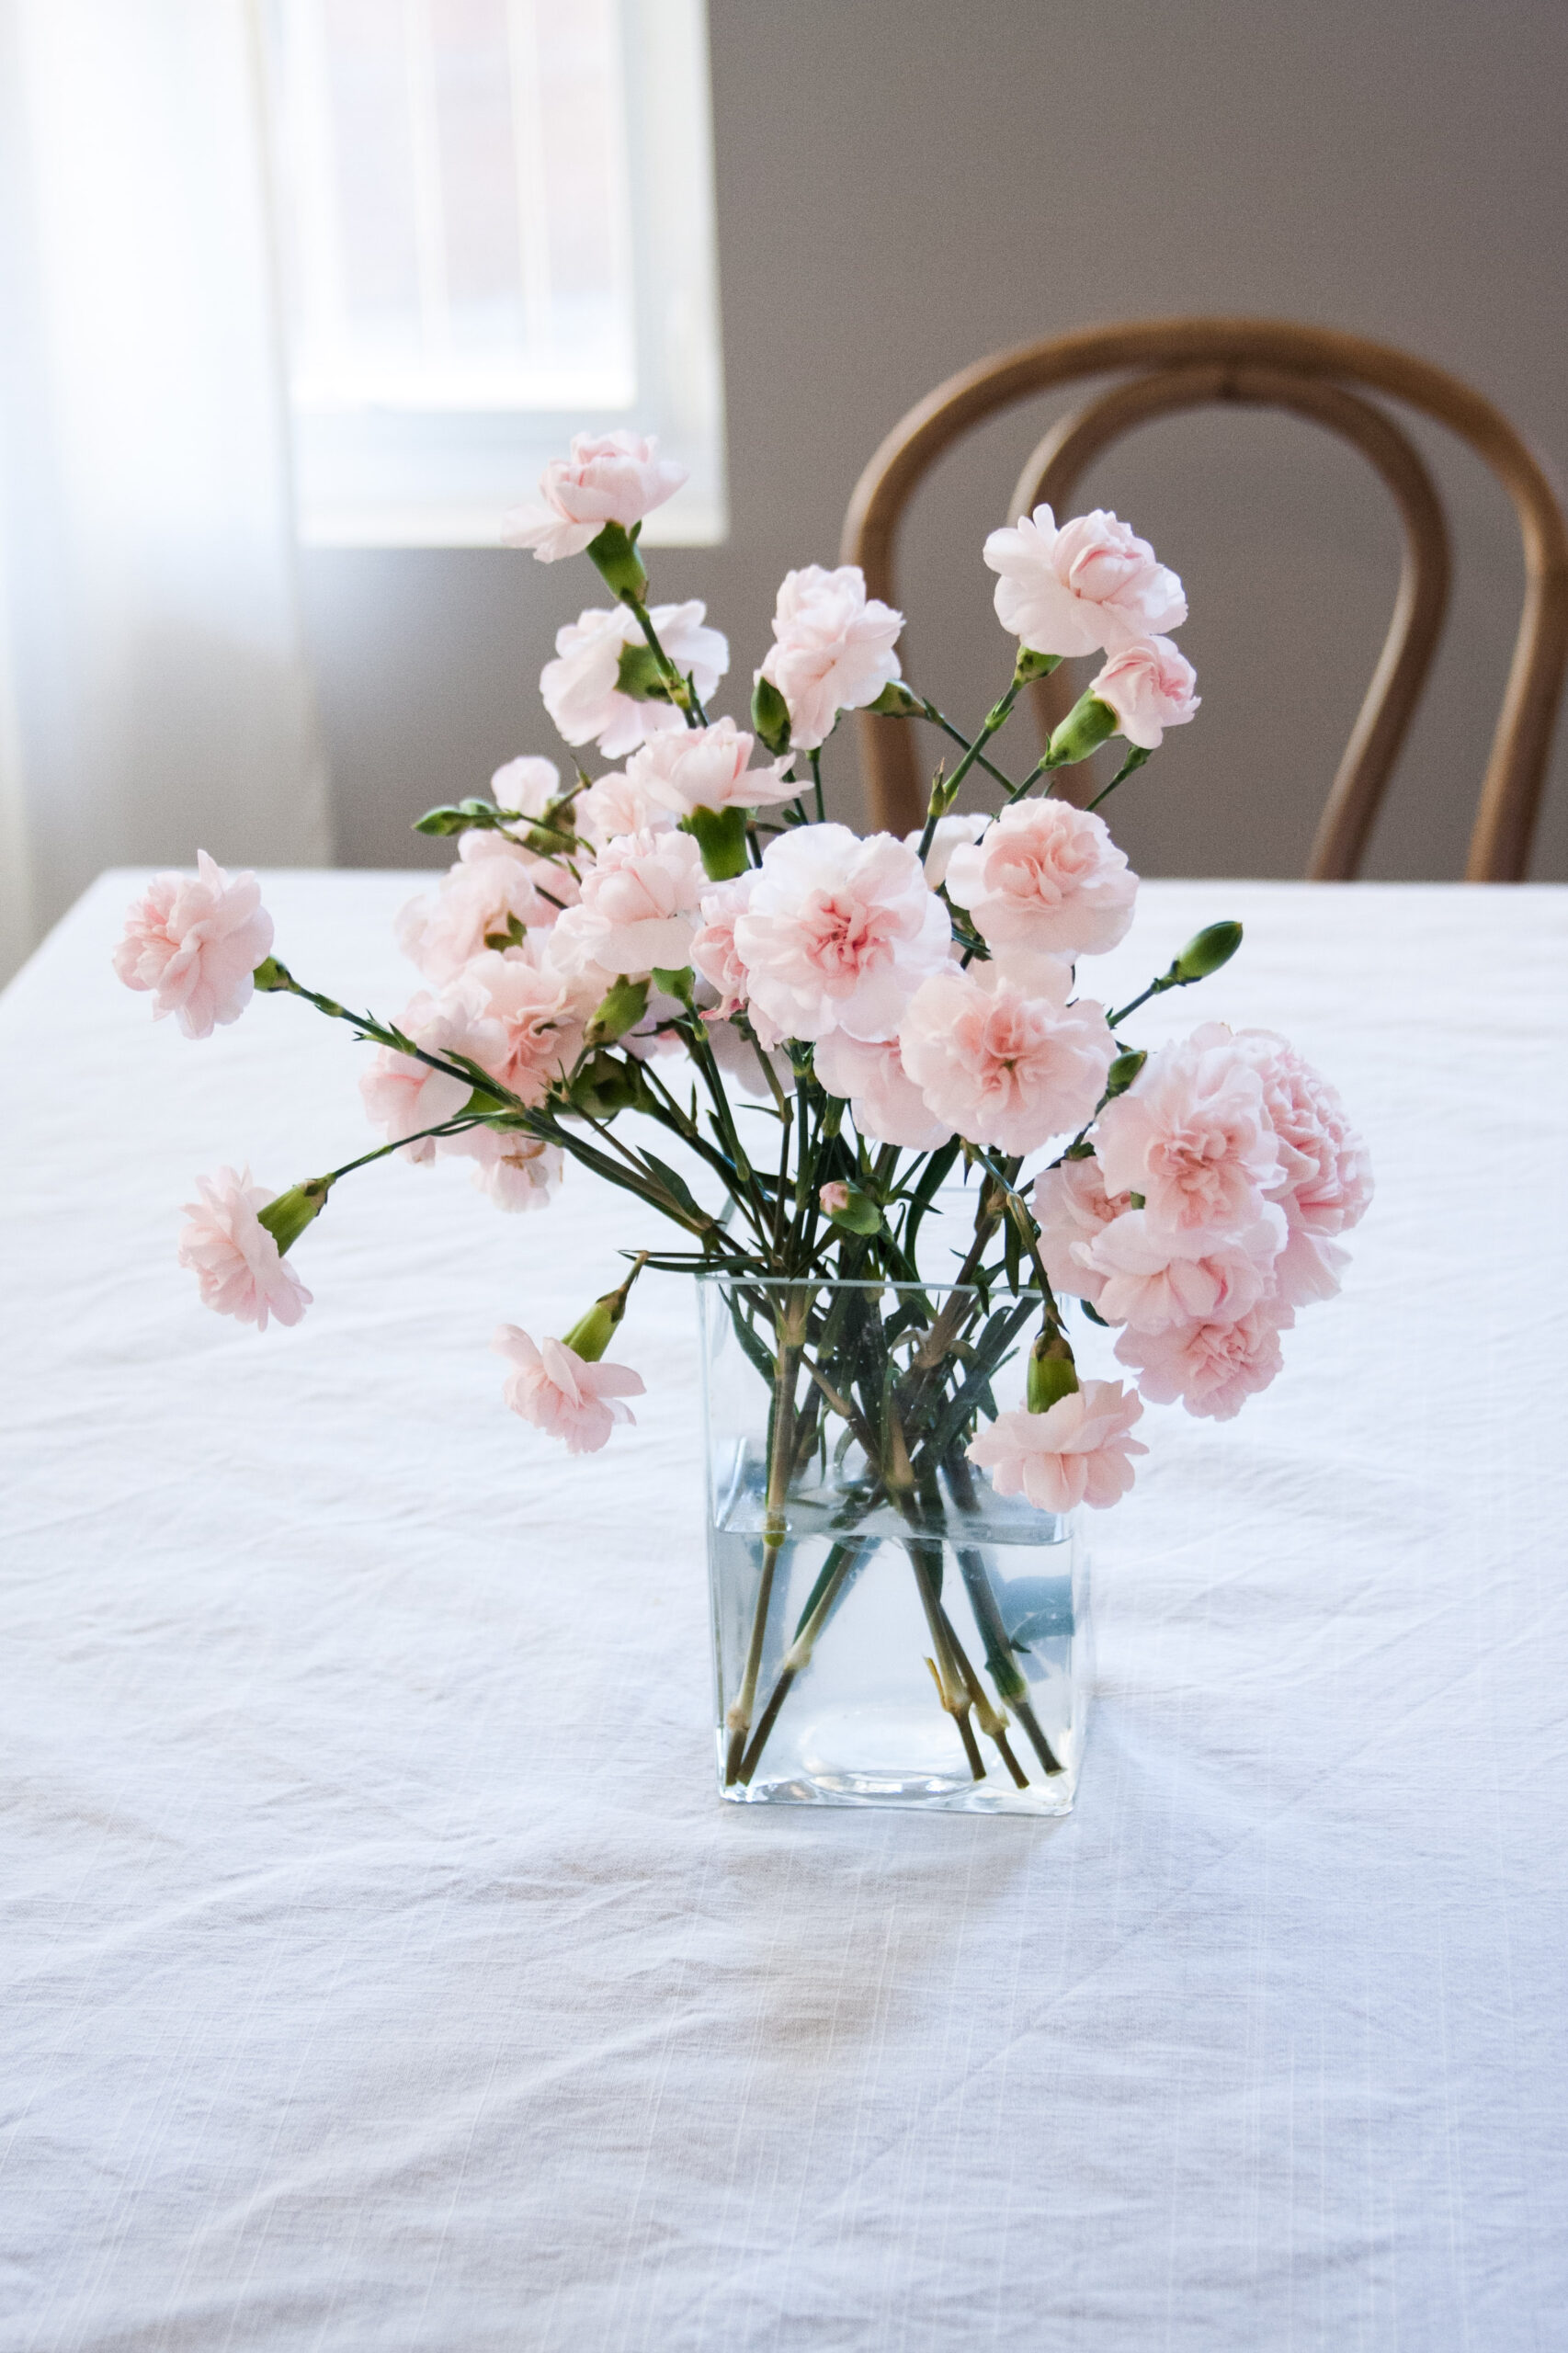 fresh pink flowers calming interior details home rgdaily blog